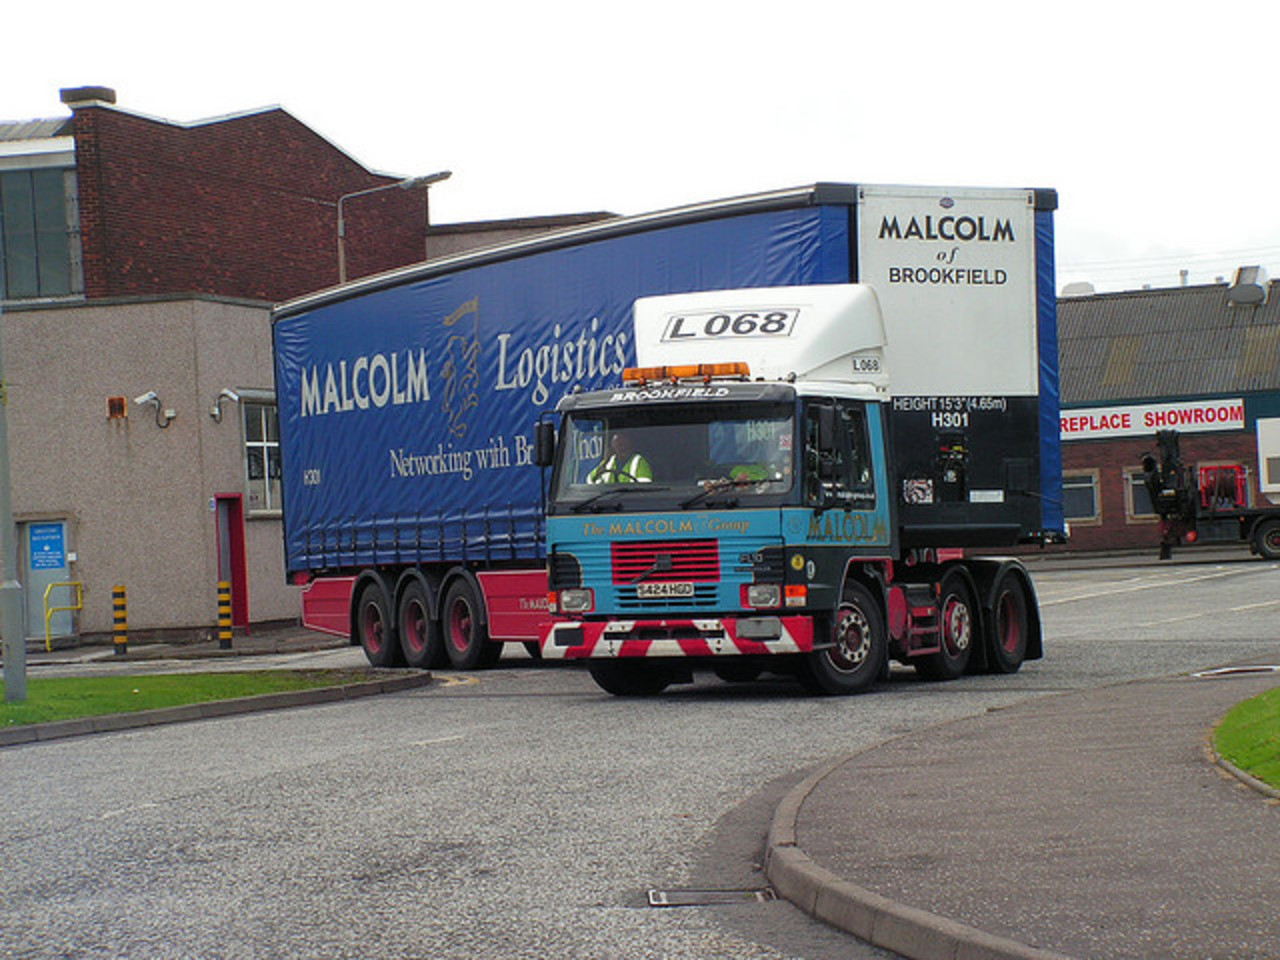 wh malcolm volvo in hillington | Flickr - Photo Sharing!